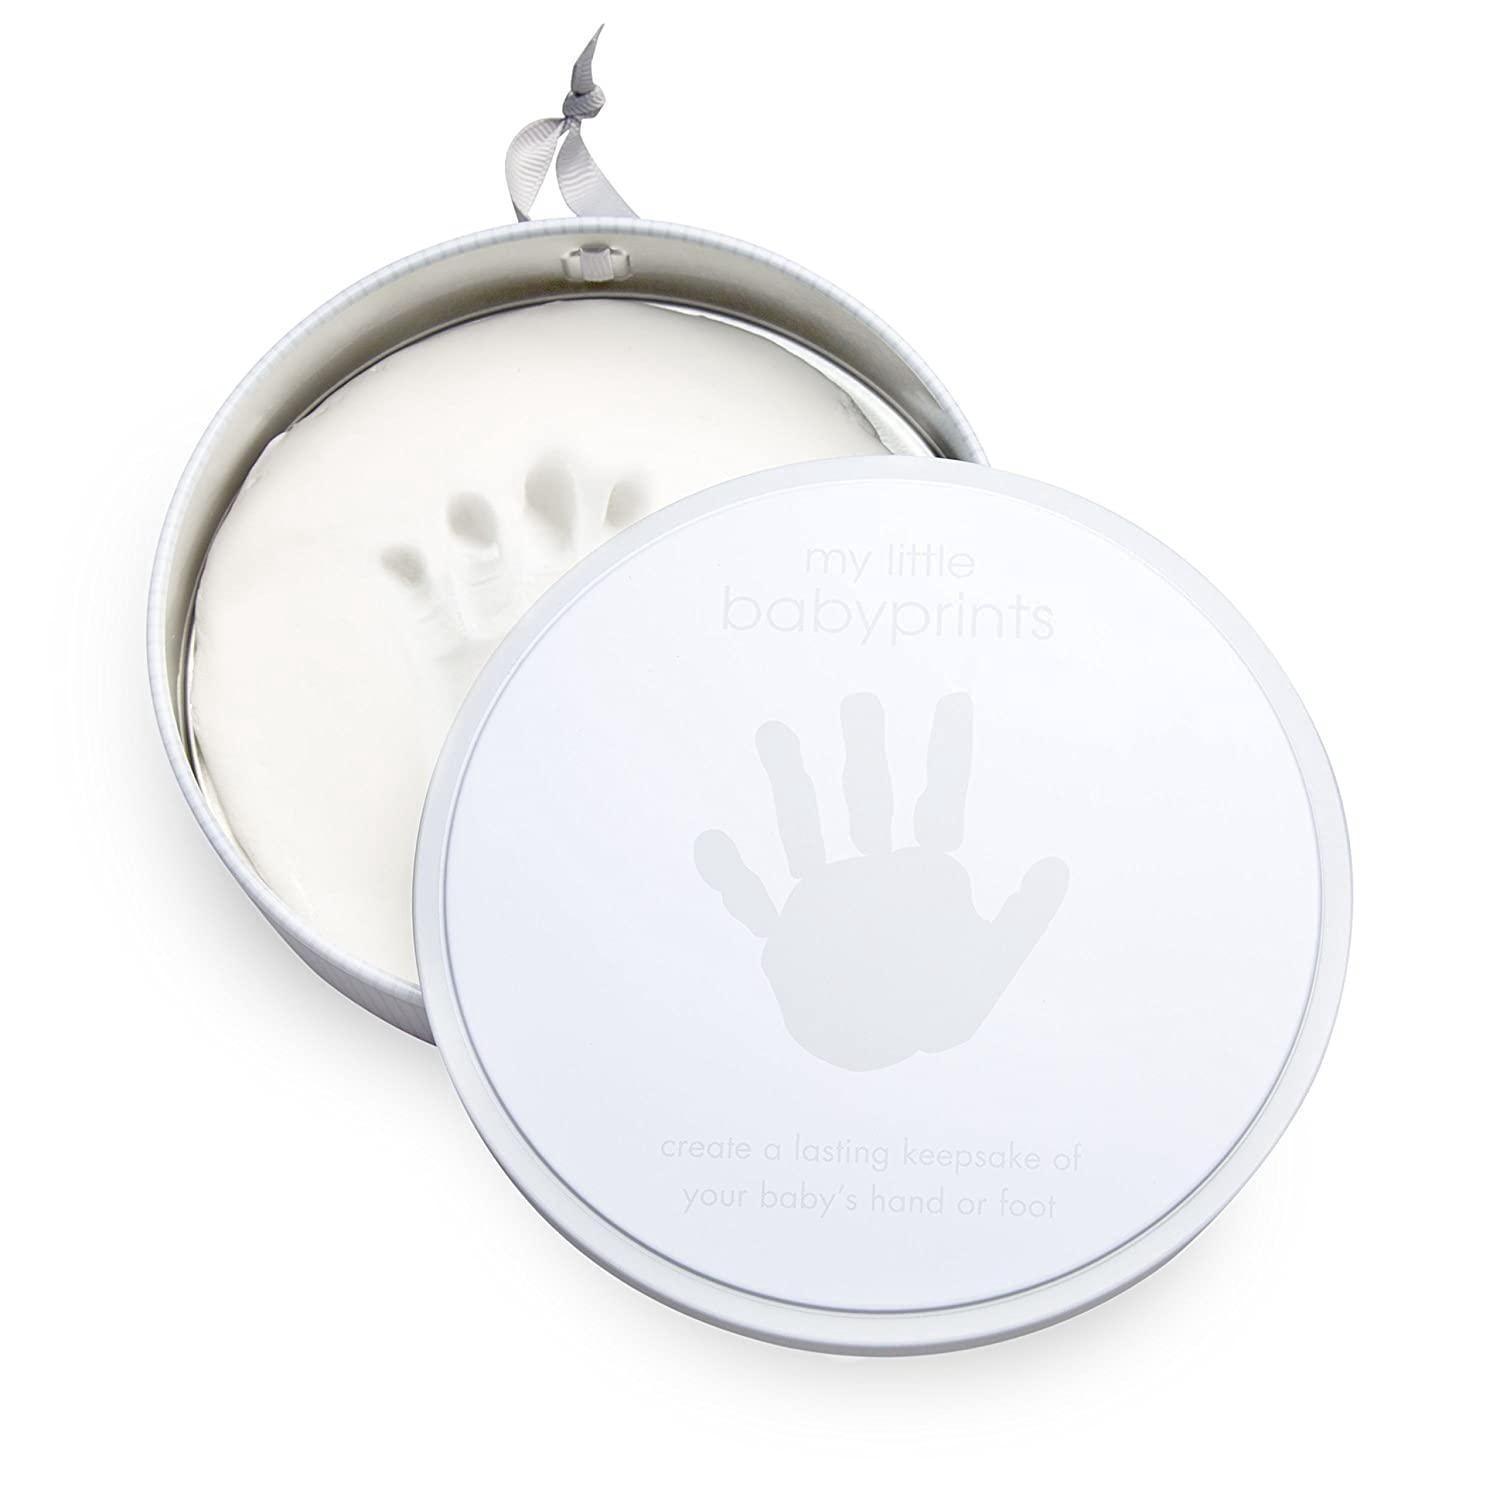 Babyprints Hand And Footprint Kit - Gray - Sunshine and Grace Gifts